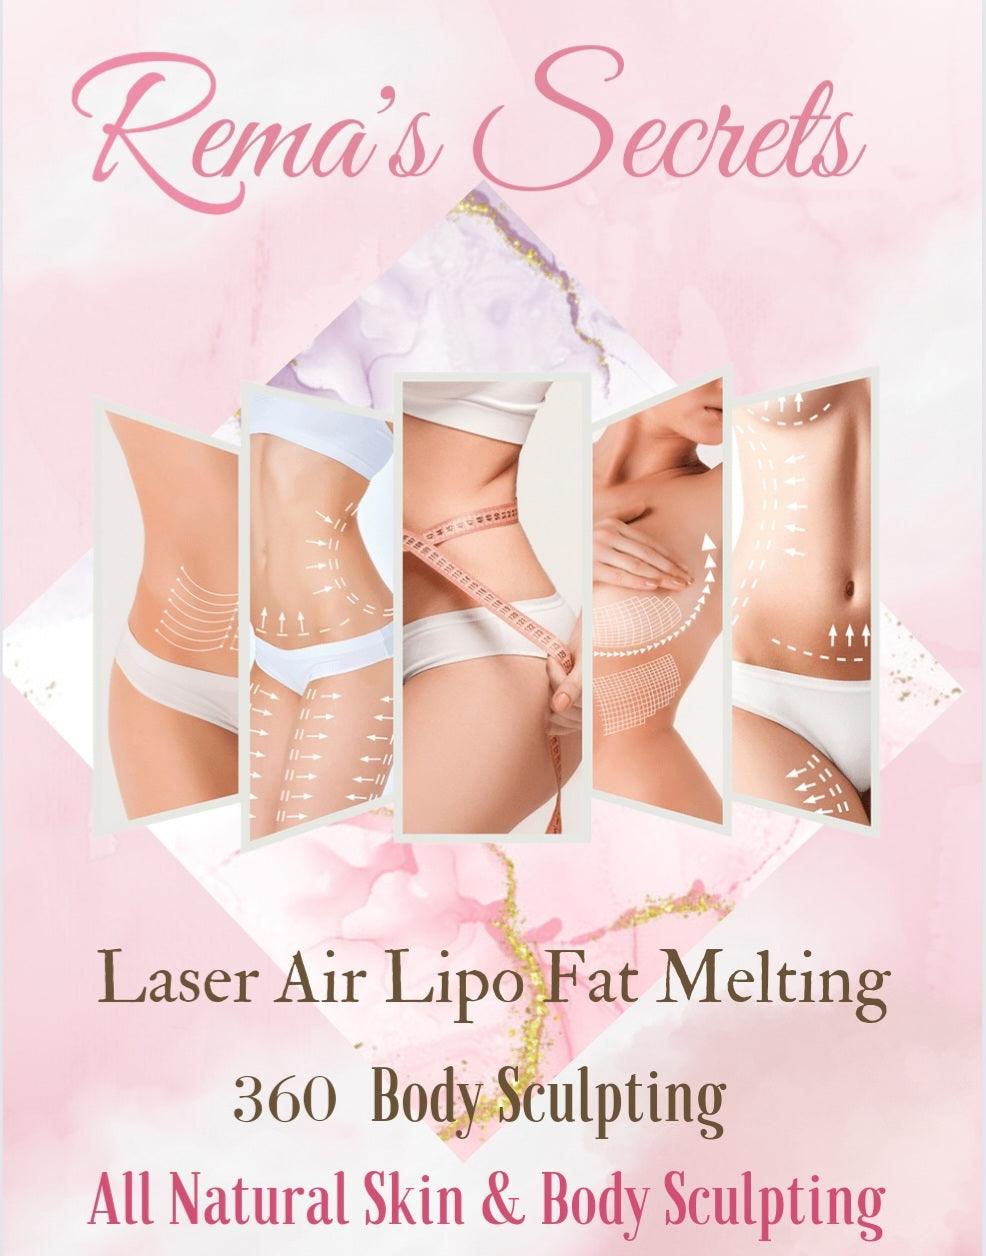 1 Sacramento's Best Body Sculpting Massage, Facials, Cavitation Spa  Services for Weight loss – Tagged Spa Services – Rema's Secrets Luxury  Day Spa Body Sculpting Massage Skin Care Day Spa